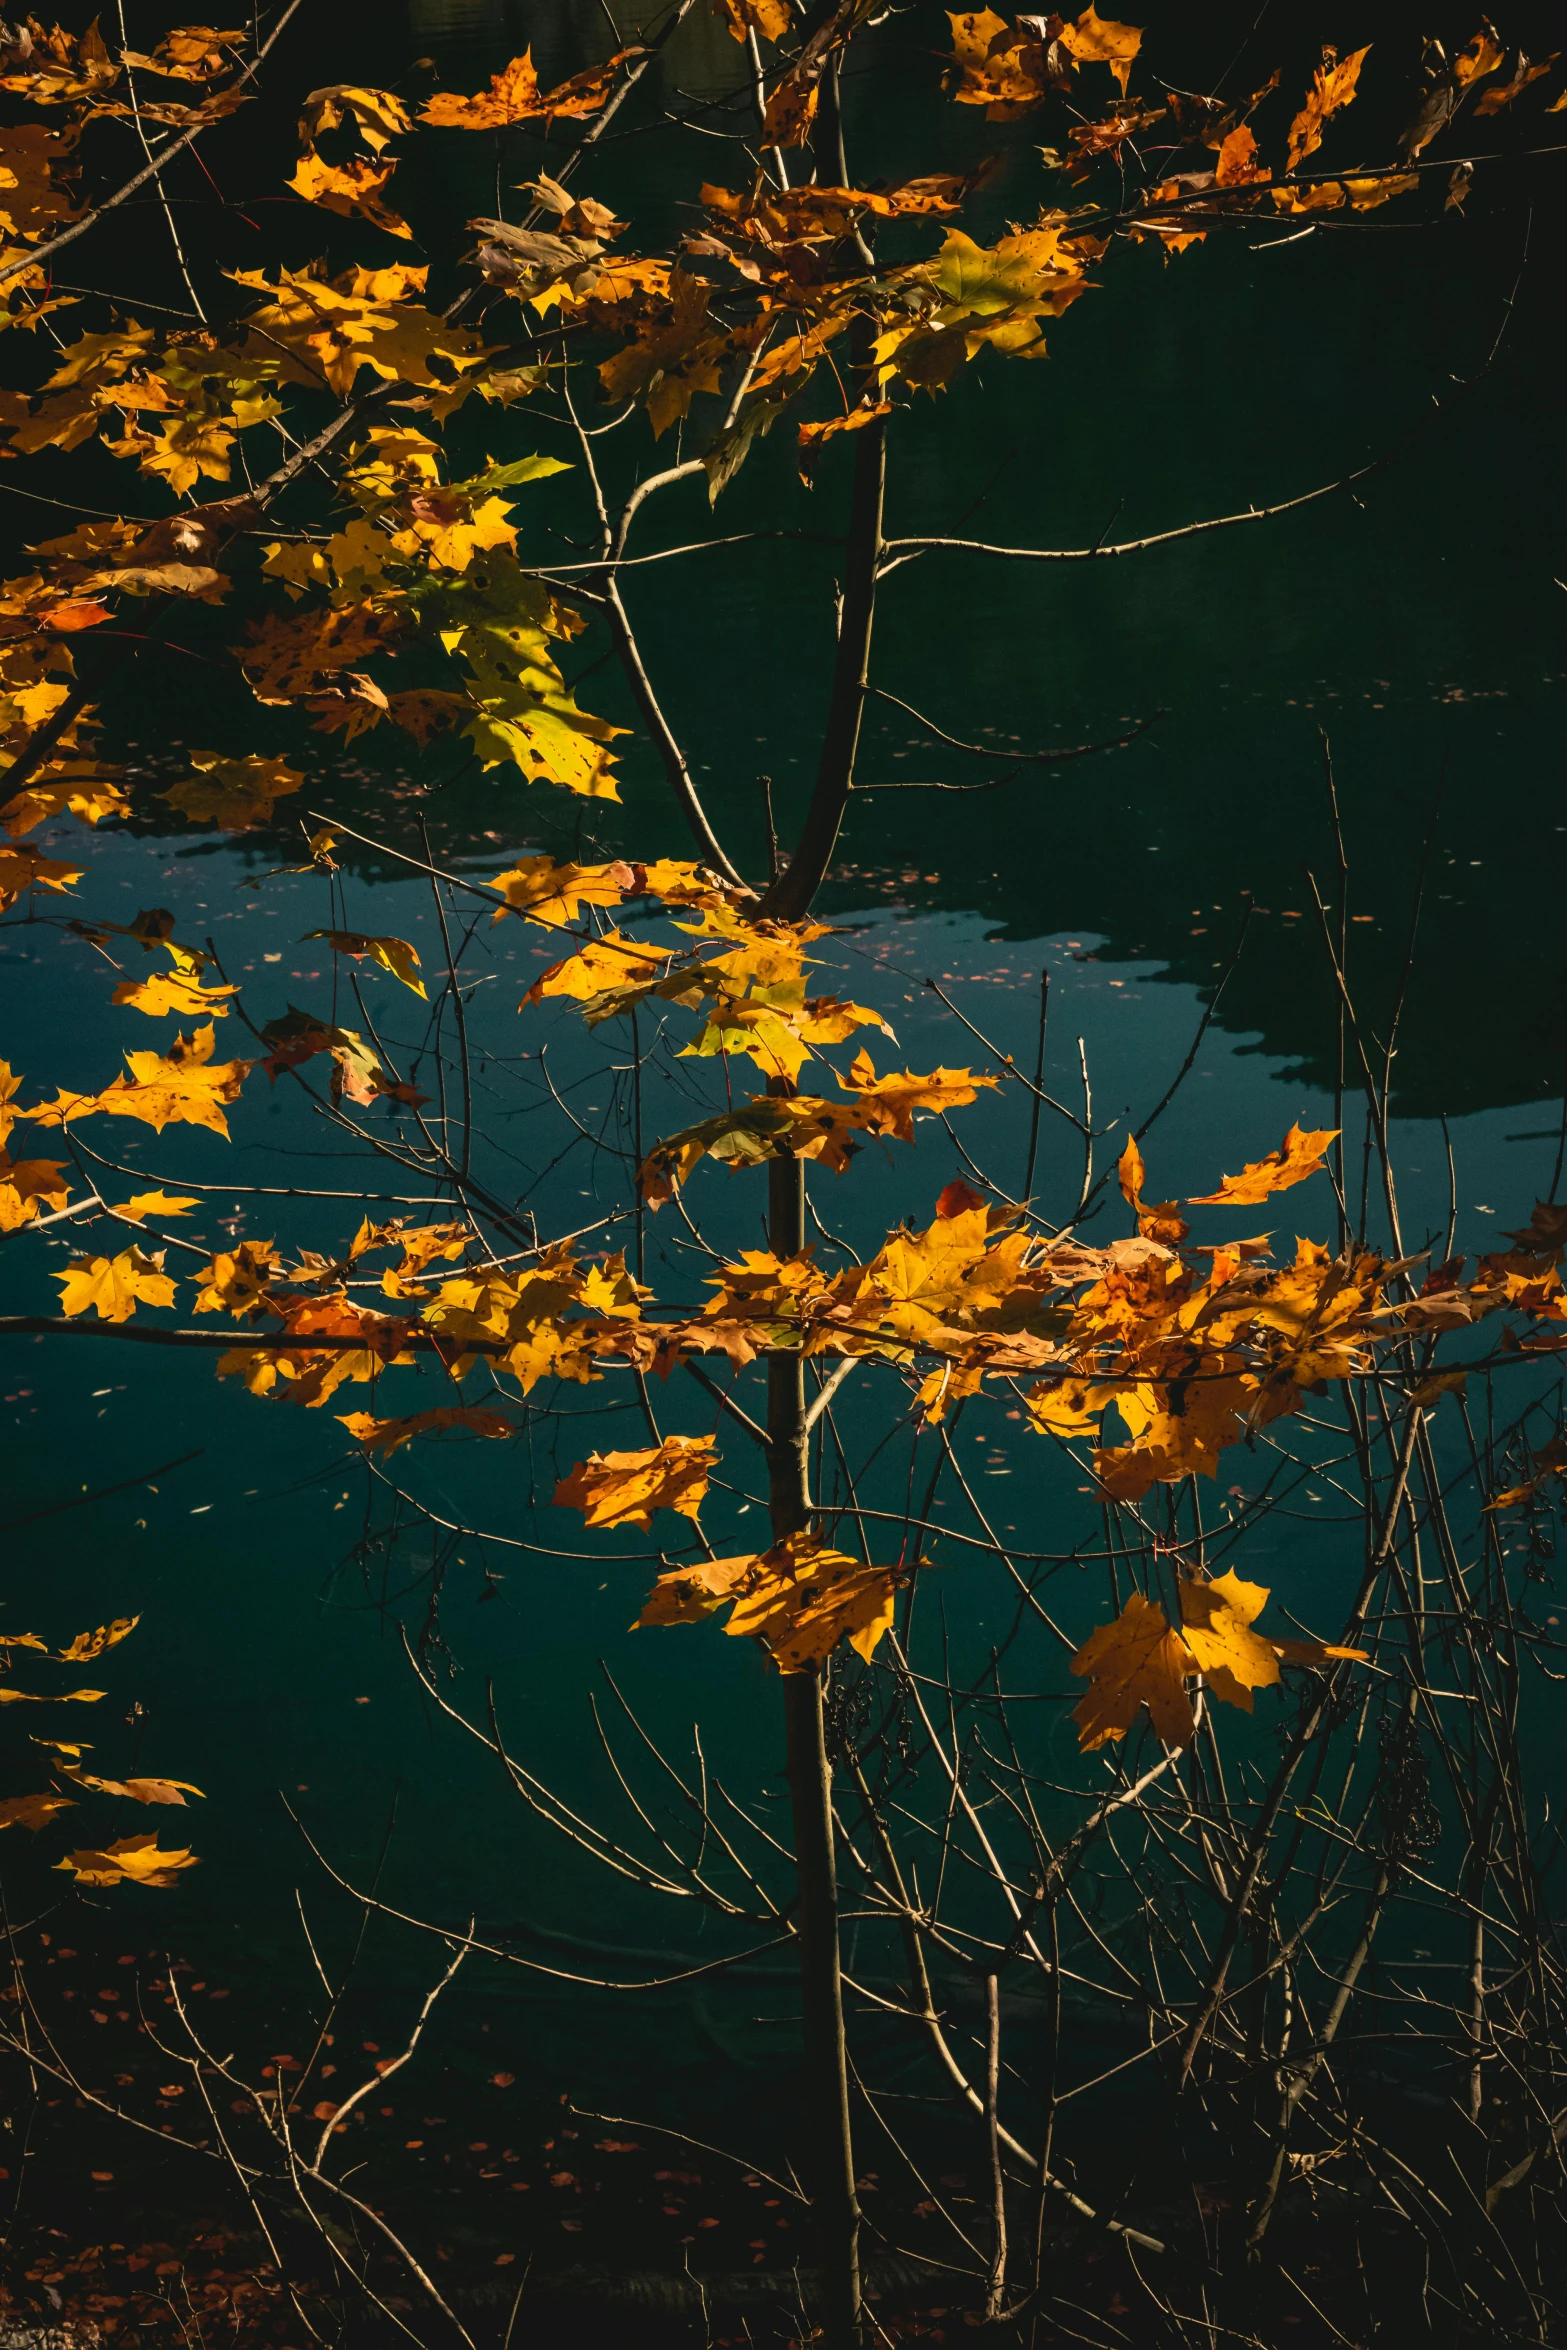 a tree with yellow leaves is next to a body of water